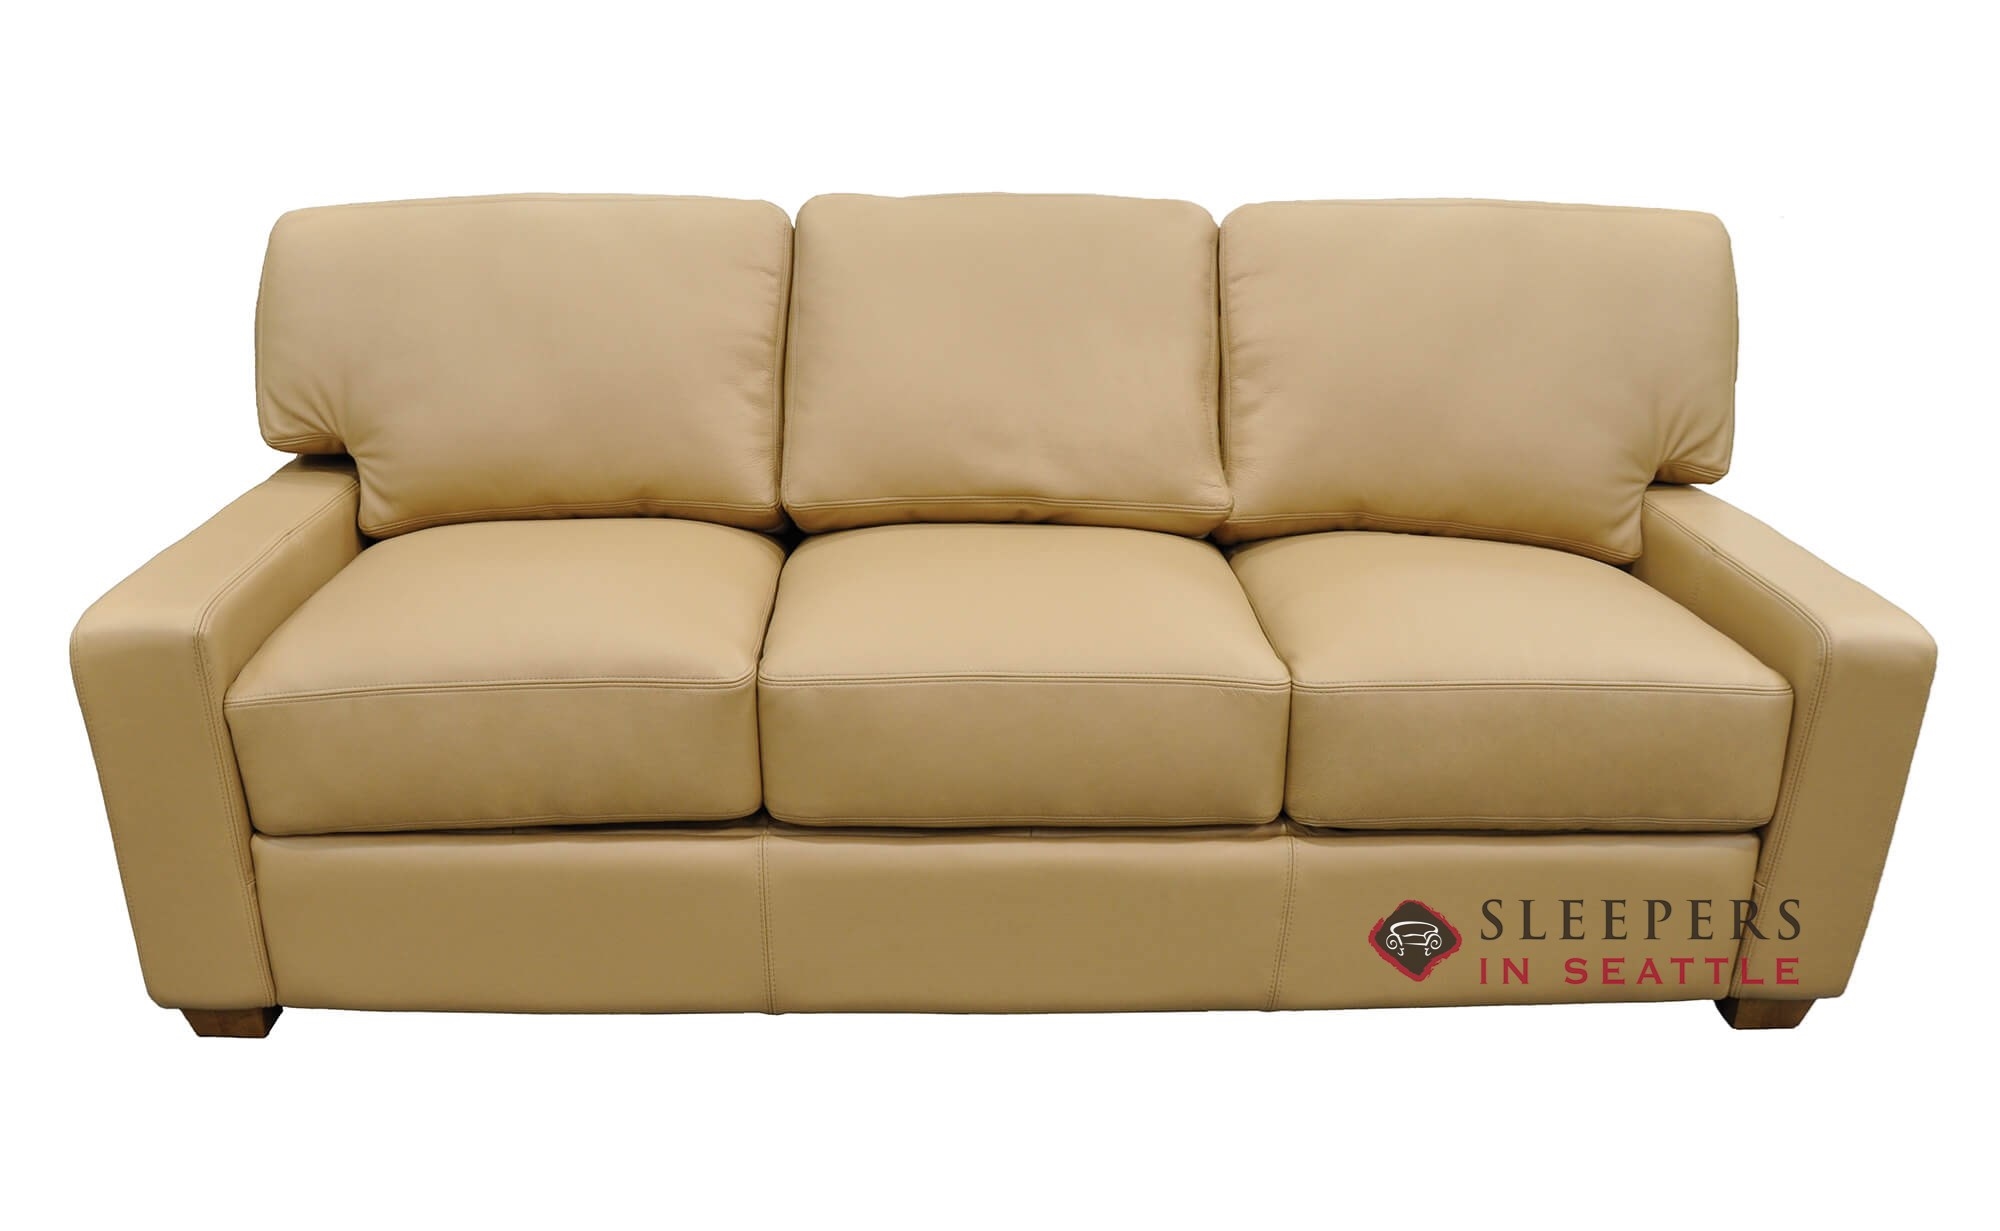 Customize And Personalize Albany By Omnia Queen Leather Sofa By Omnia Queen Size Sofa Bed Sleepersinseattle Com